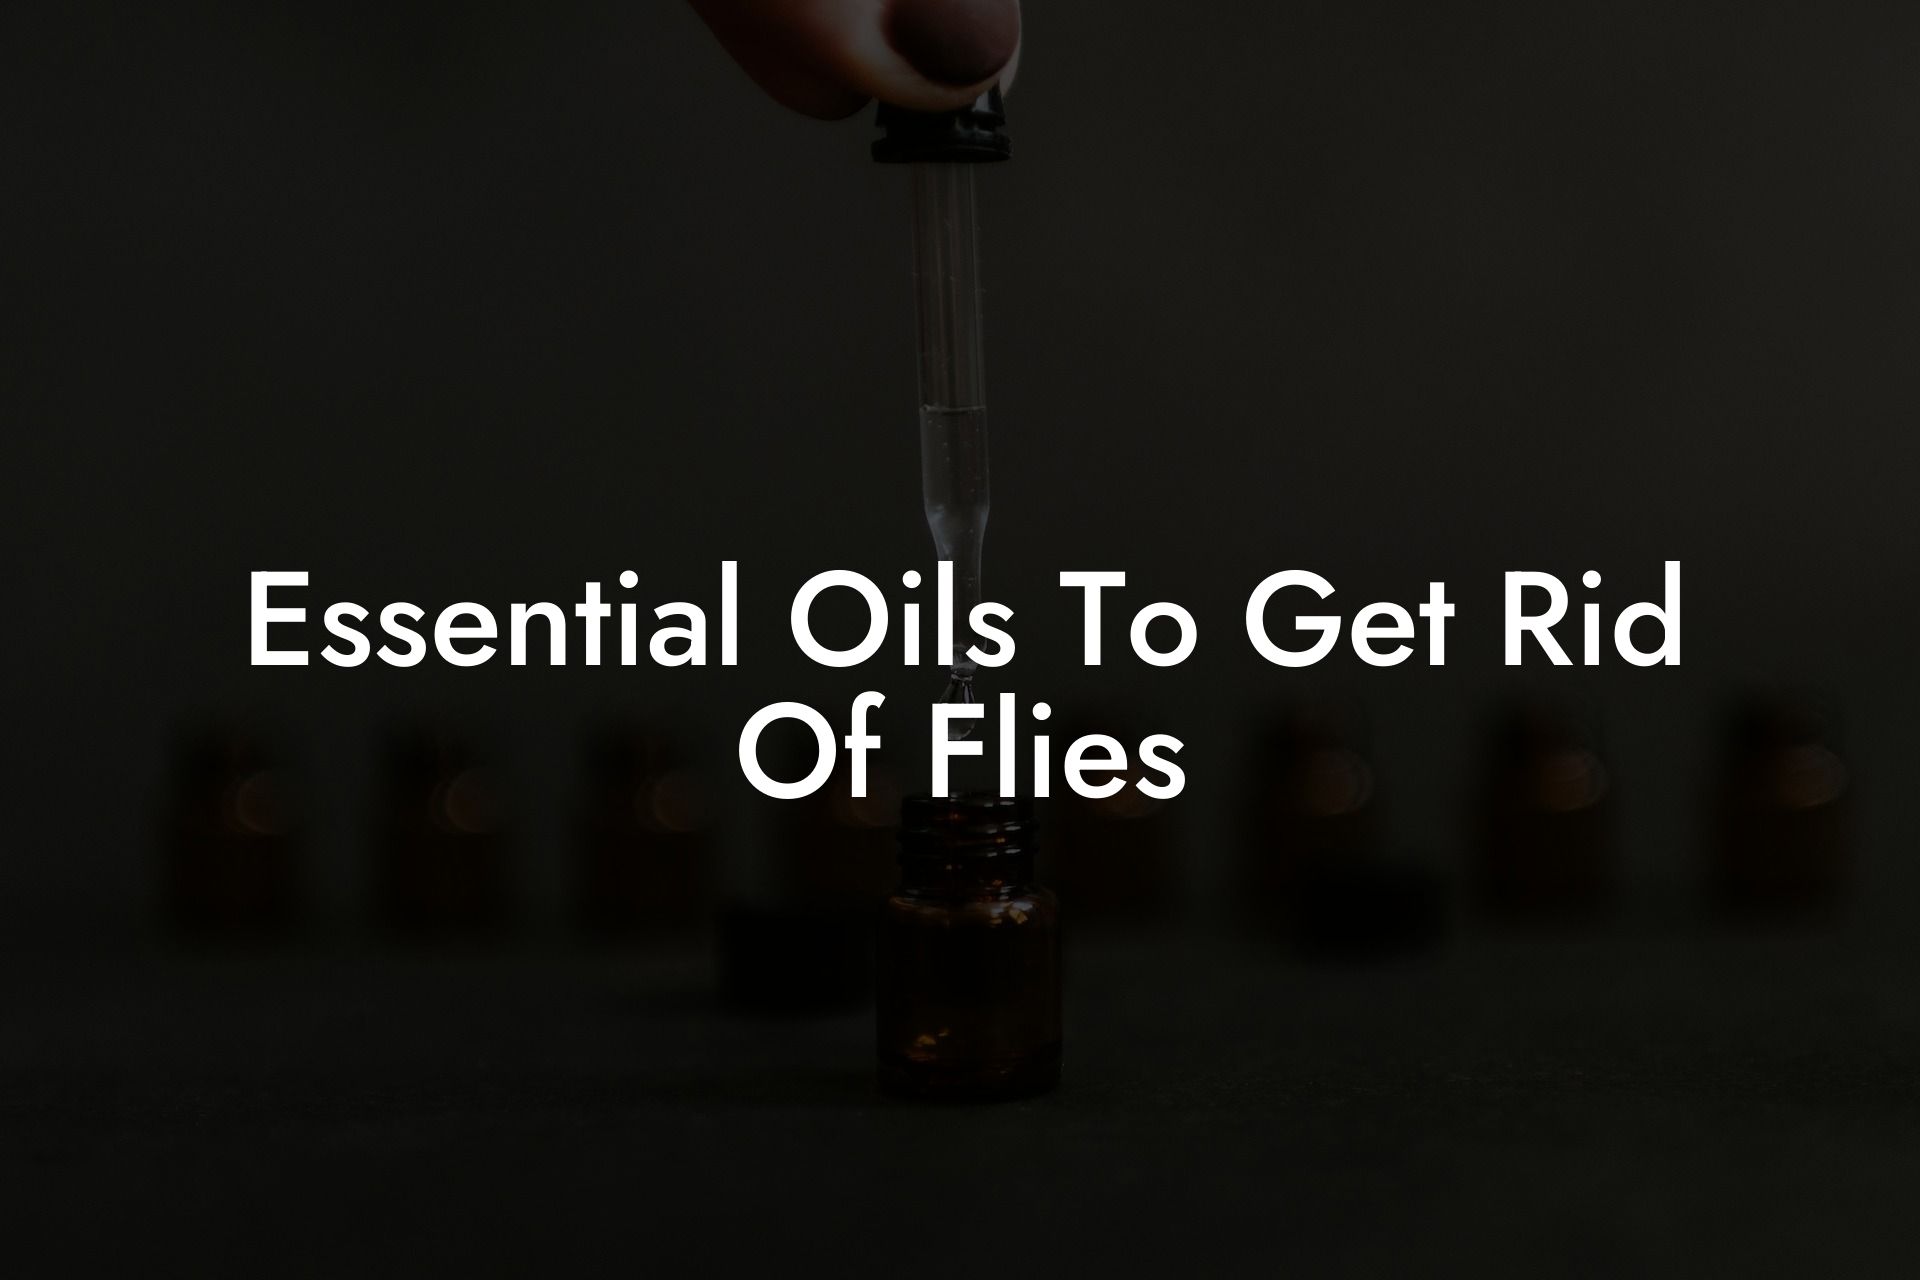 Essential Oils To Get Rid Of Flies